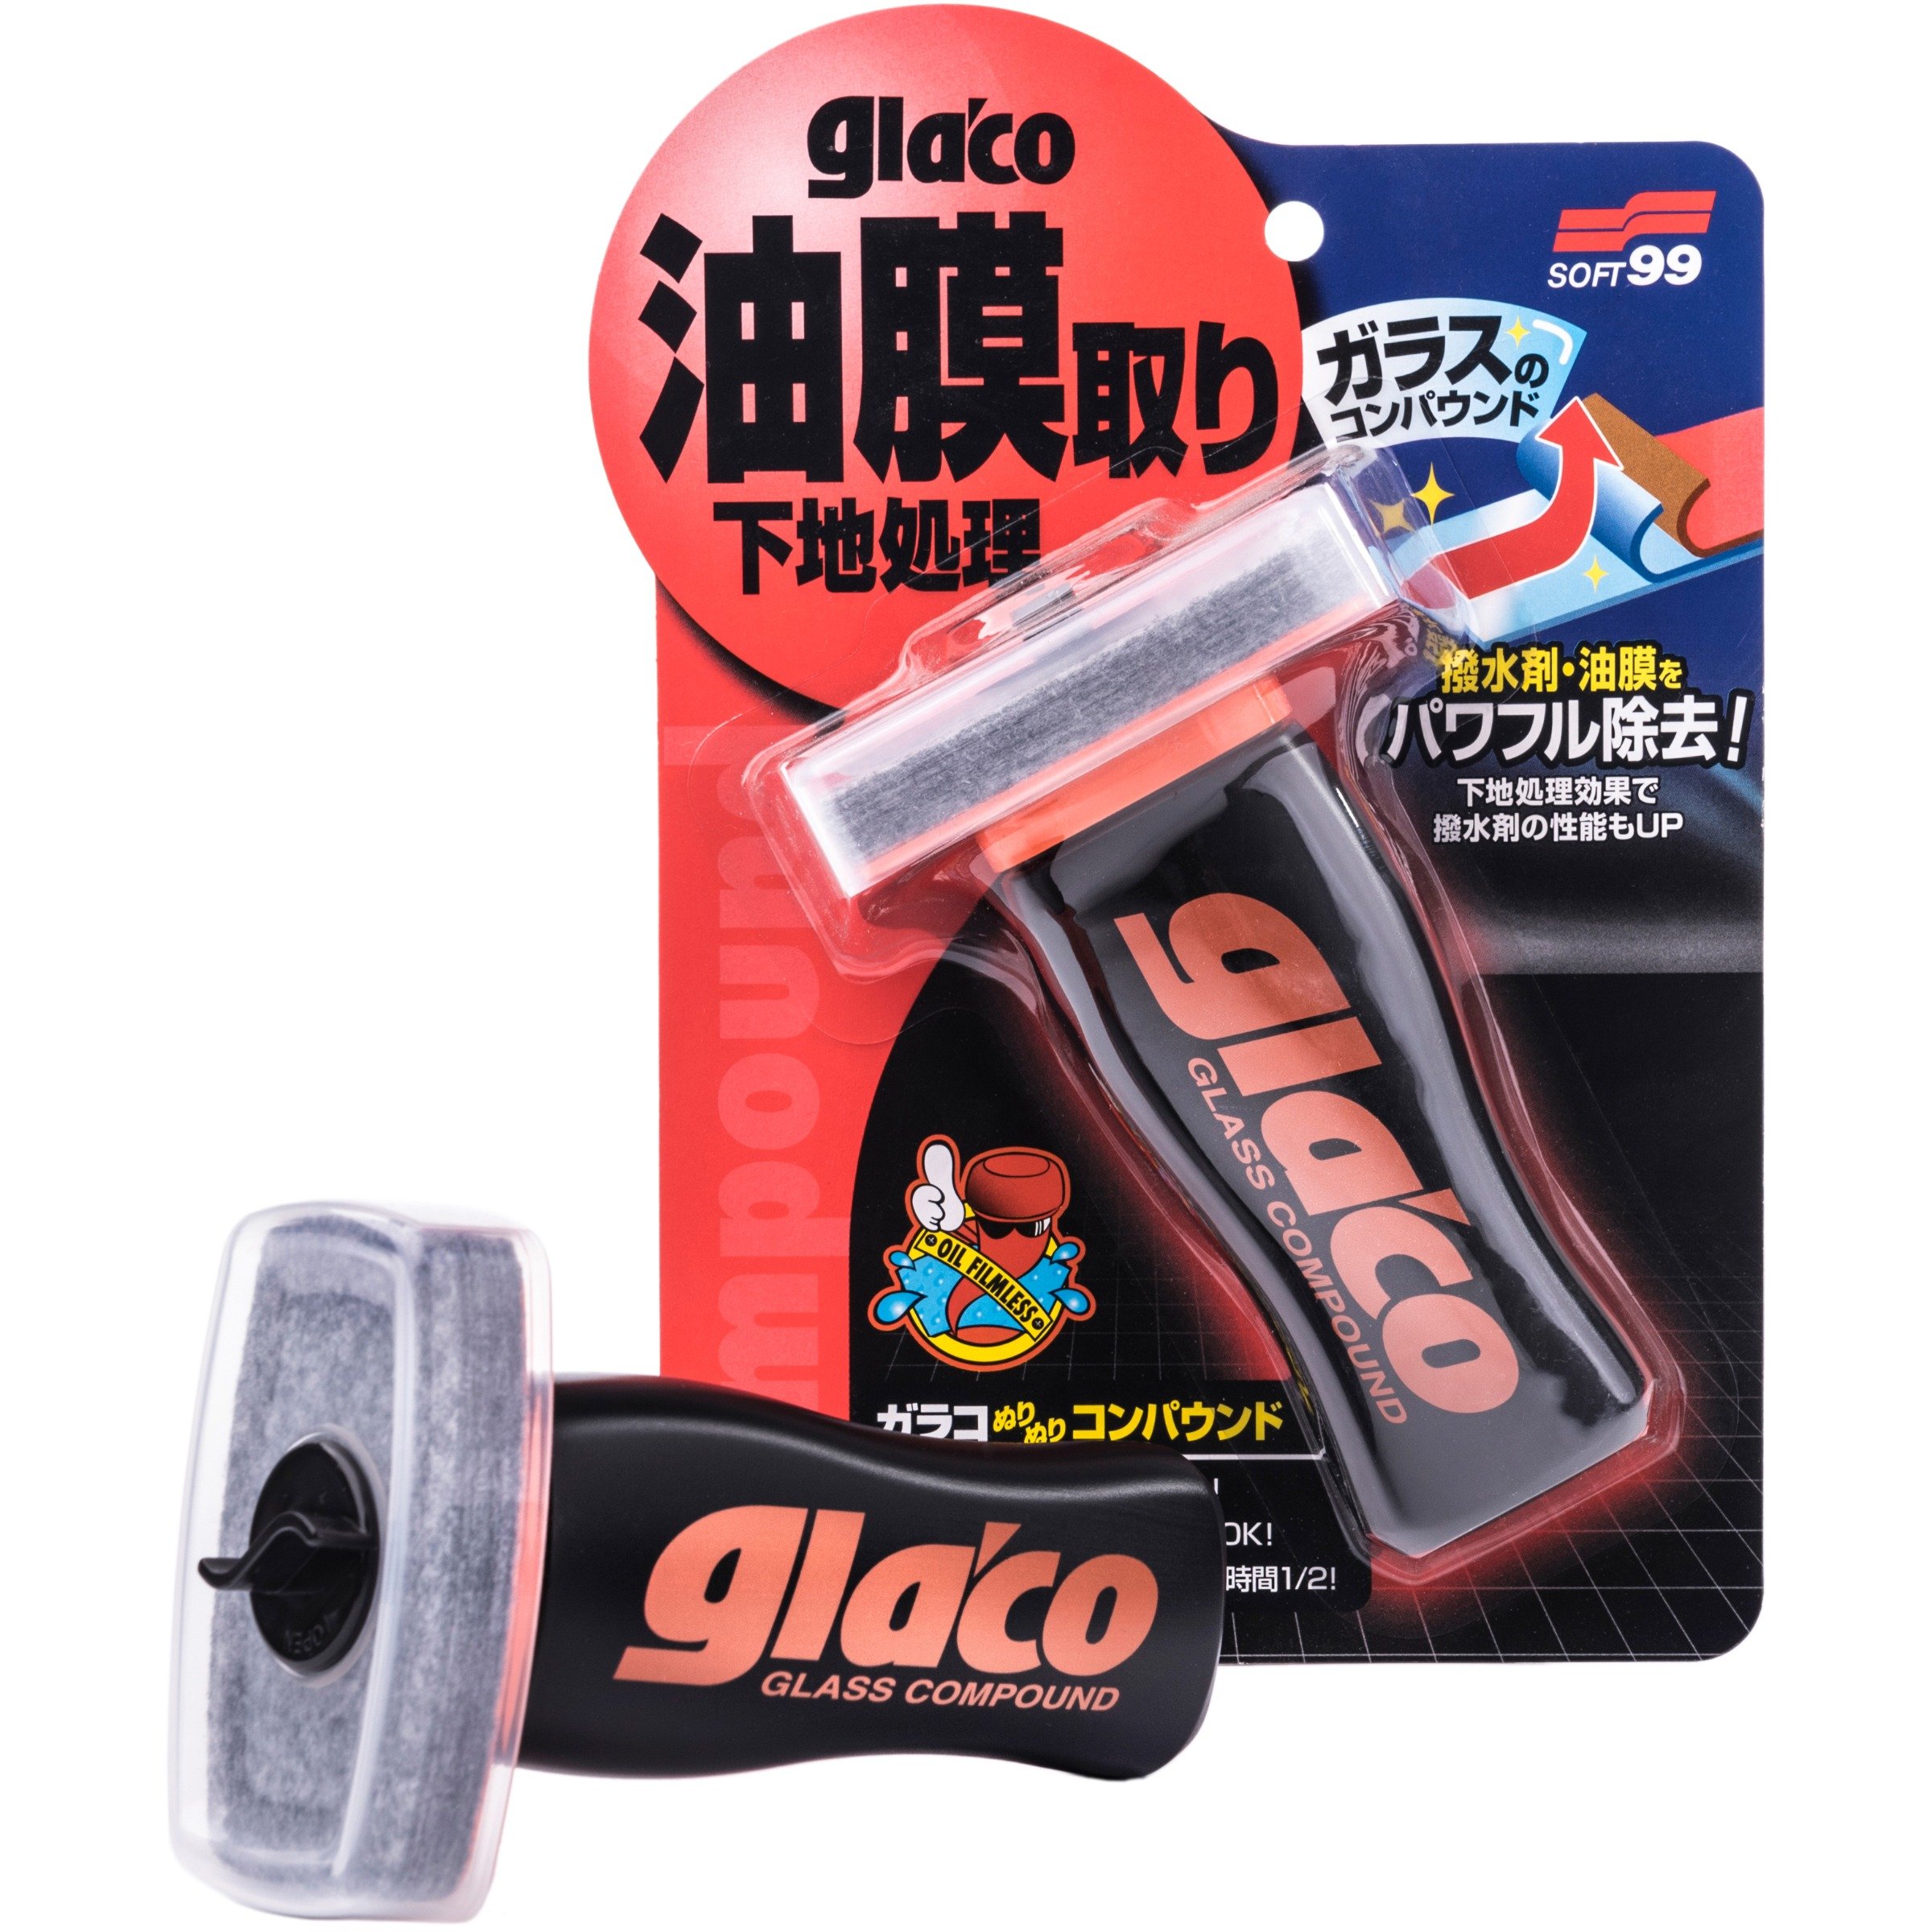 Glaco Glass Compound Roll On - 100ml